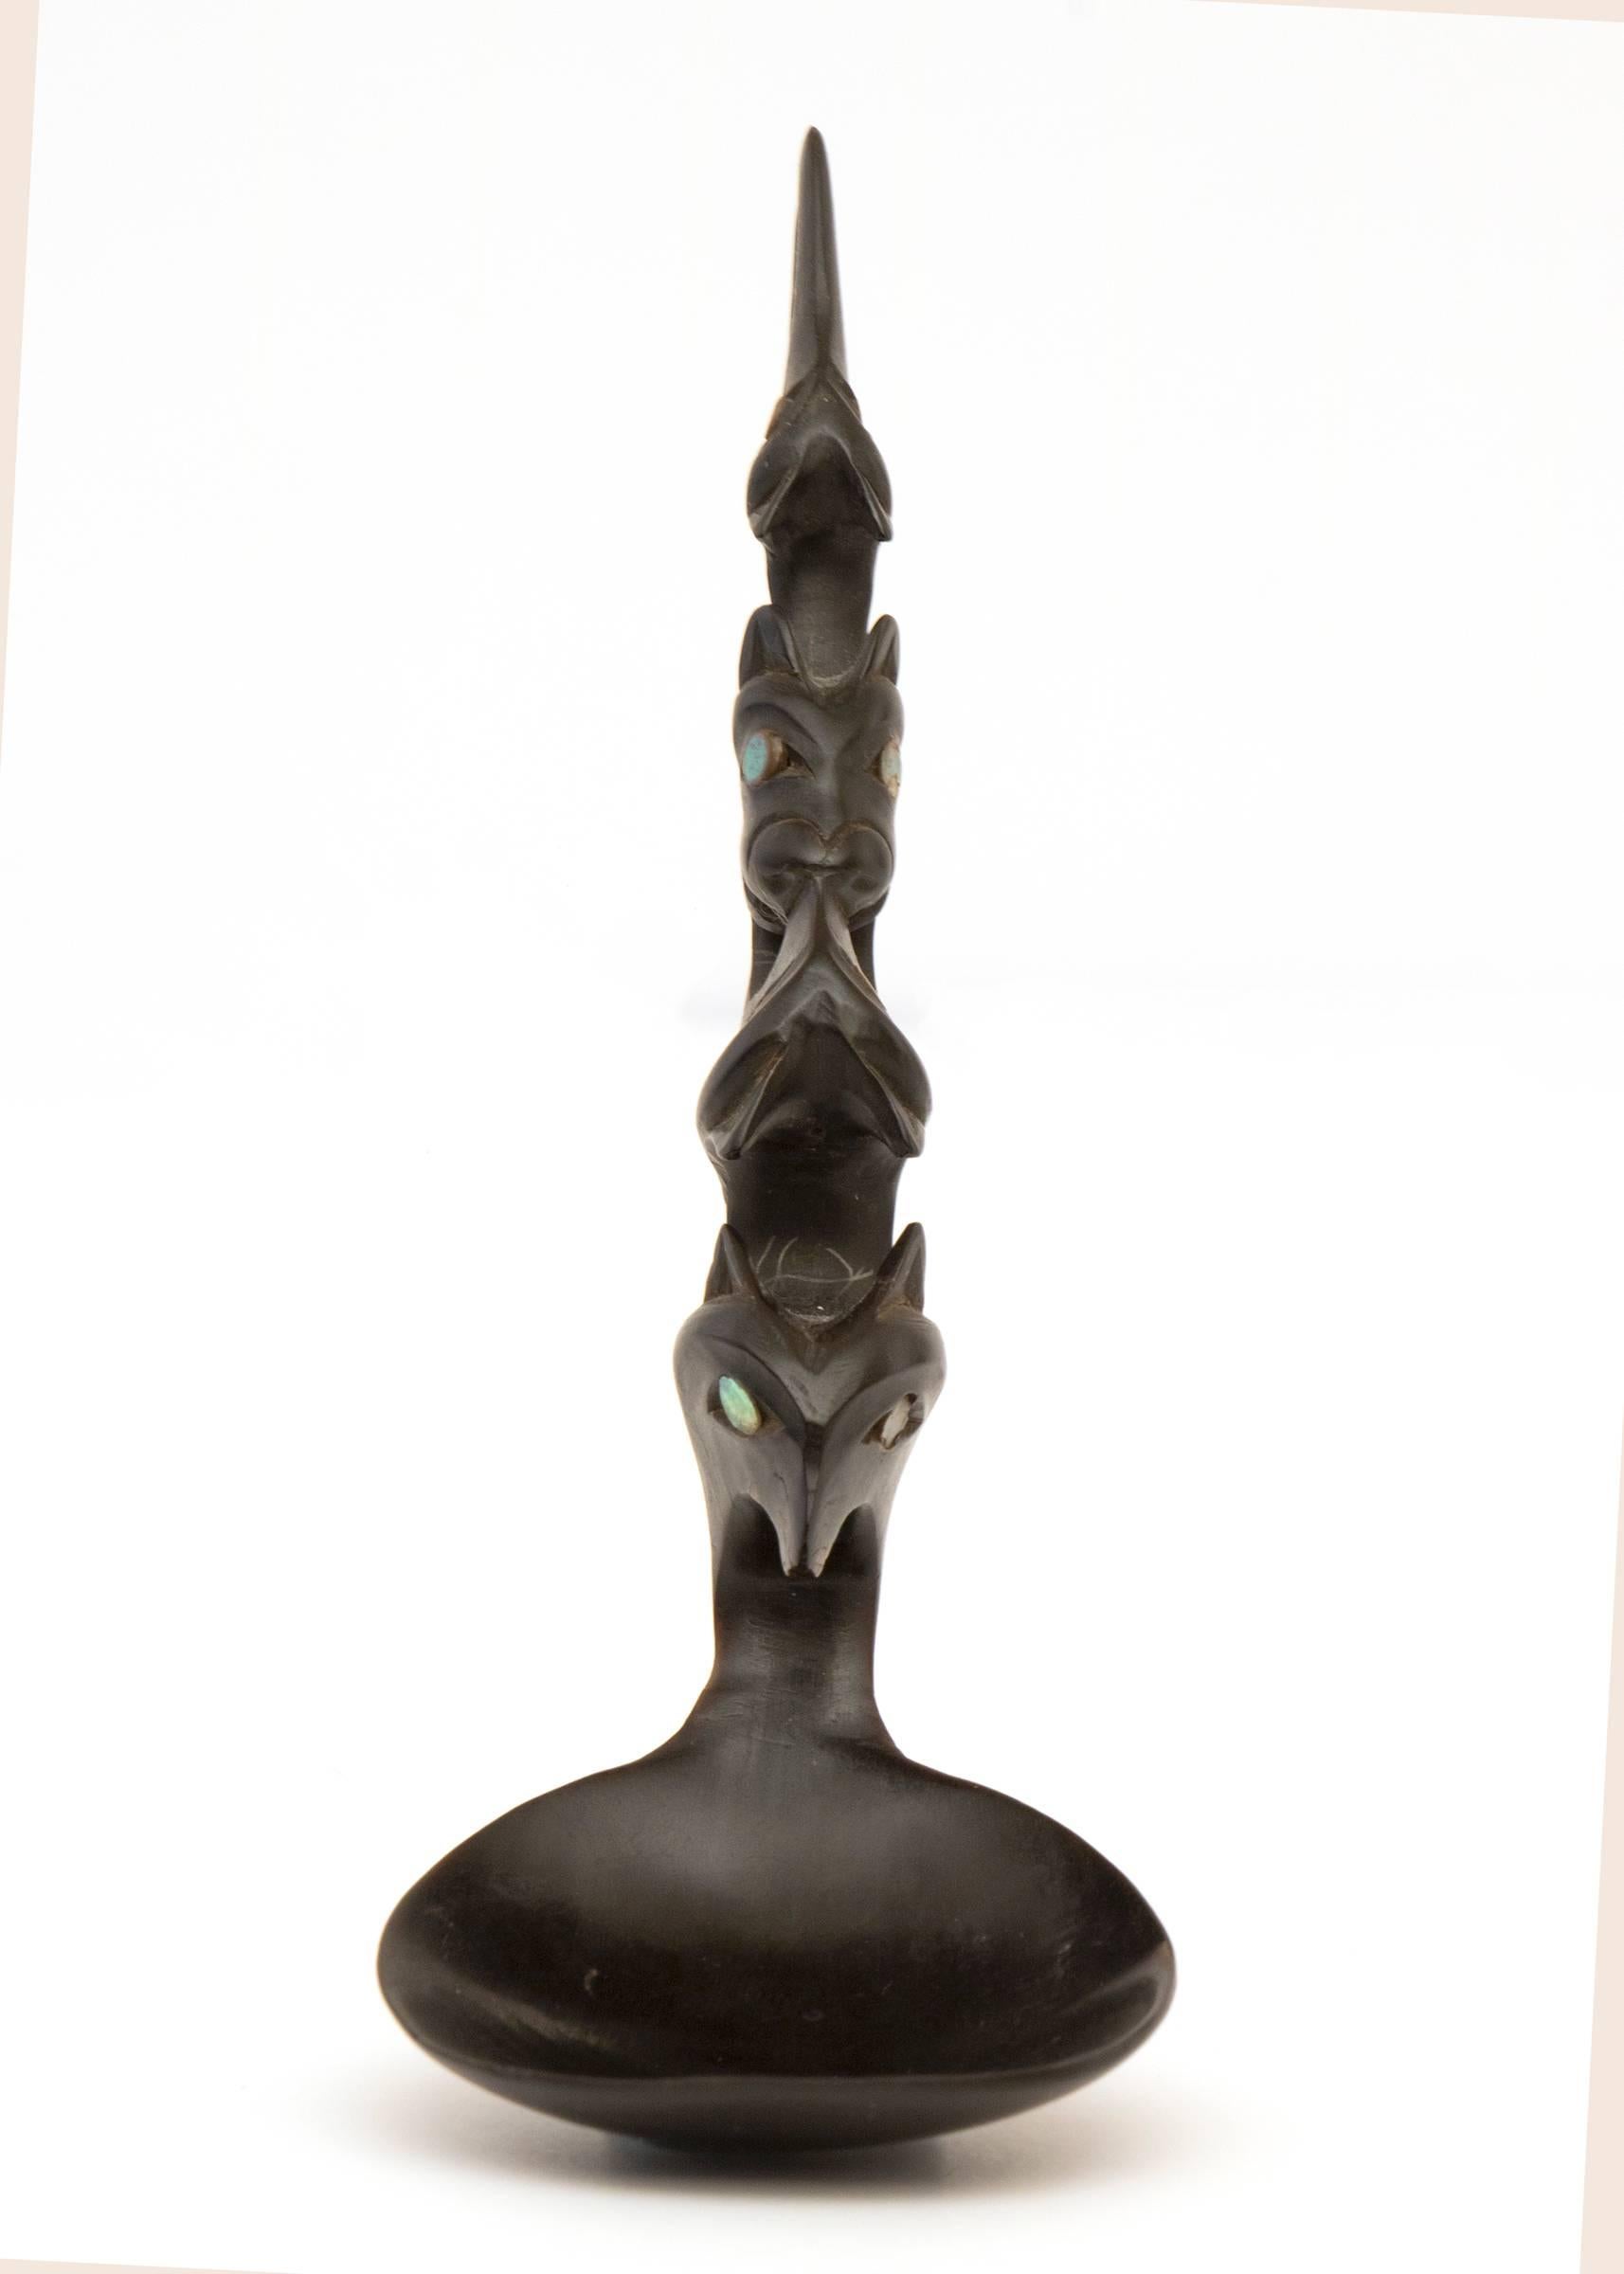 An American Indian/Northwest coast spoon or ladle exquisitely carved with animal effigies. Custom display stand is included. Overall dimensions with the stand are 8.5 x 3 x 3 inches; spoon measures 6 x 2 x 2 inches.

Carved horn spoons are